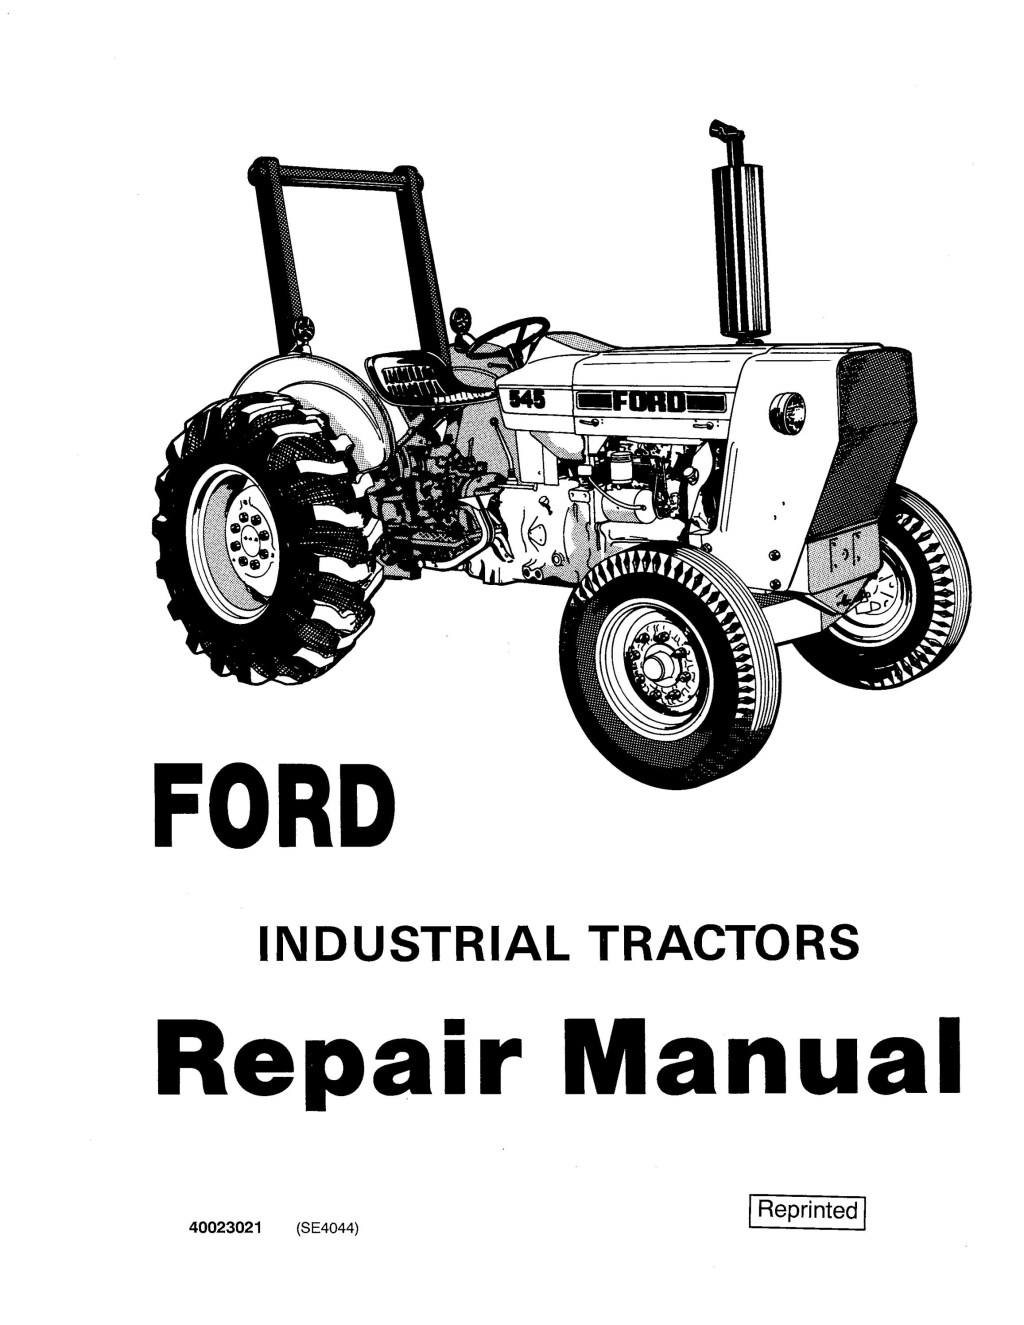 Picture of: Ford  Industrial Tractor Service Repair Manual by kmdisiodok